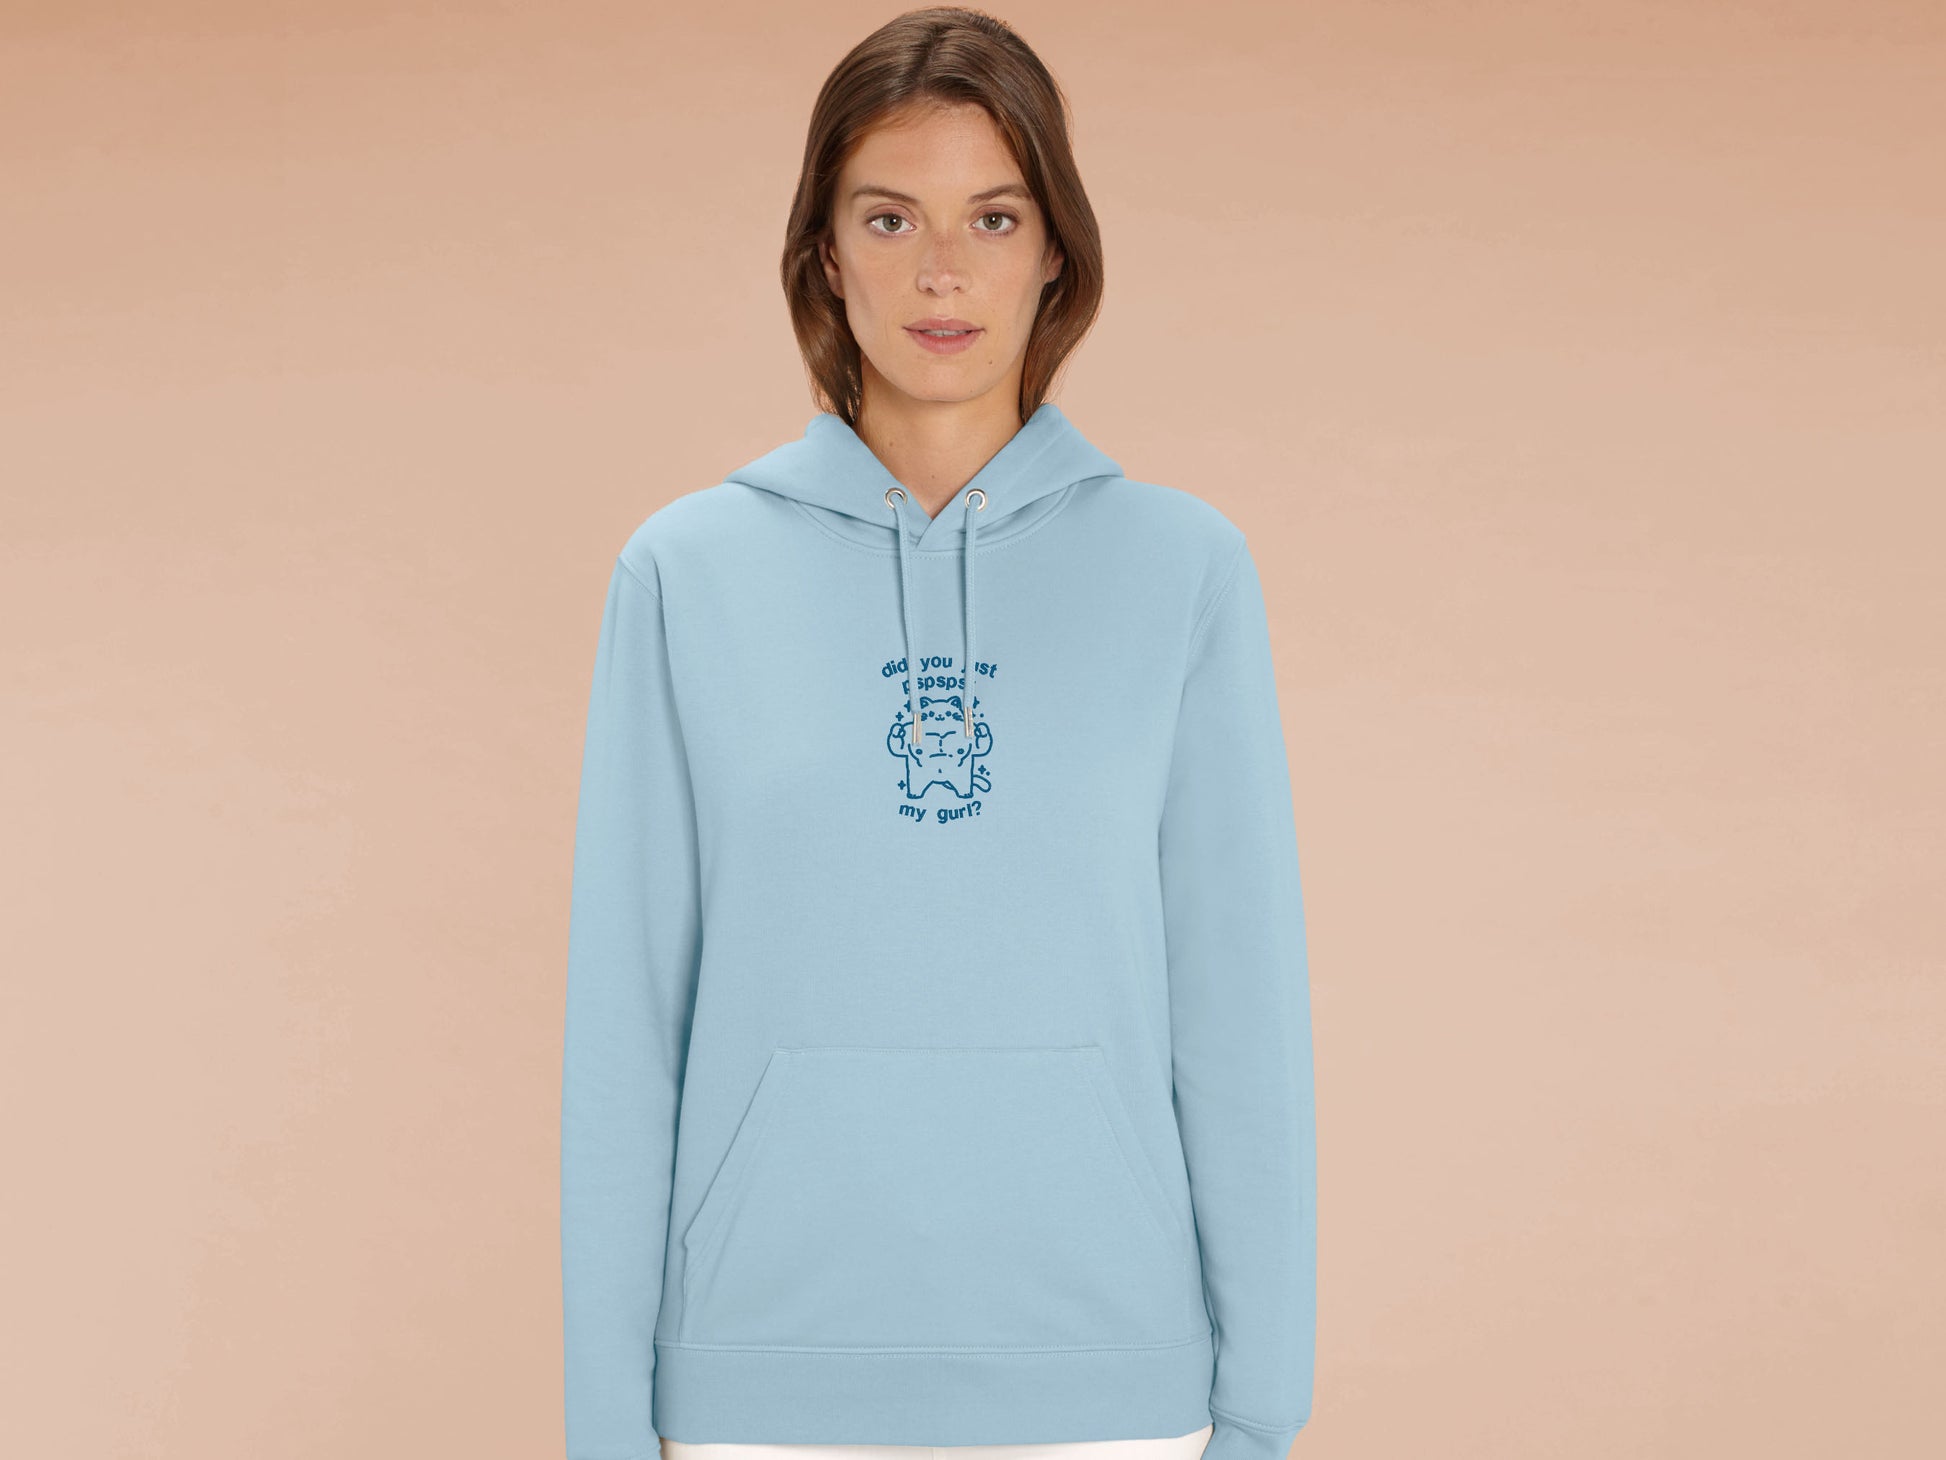 A woman wearing a long sleeved blue fleece hoodie with a blue embroidered design with a cute muscular chibi cat design and the text did you just pspspst my gurl?